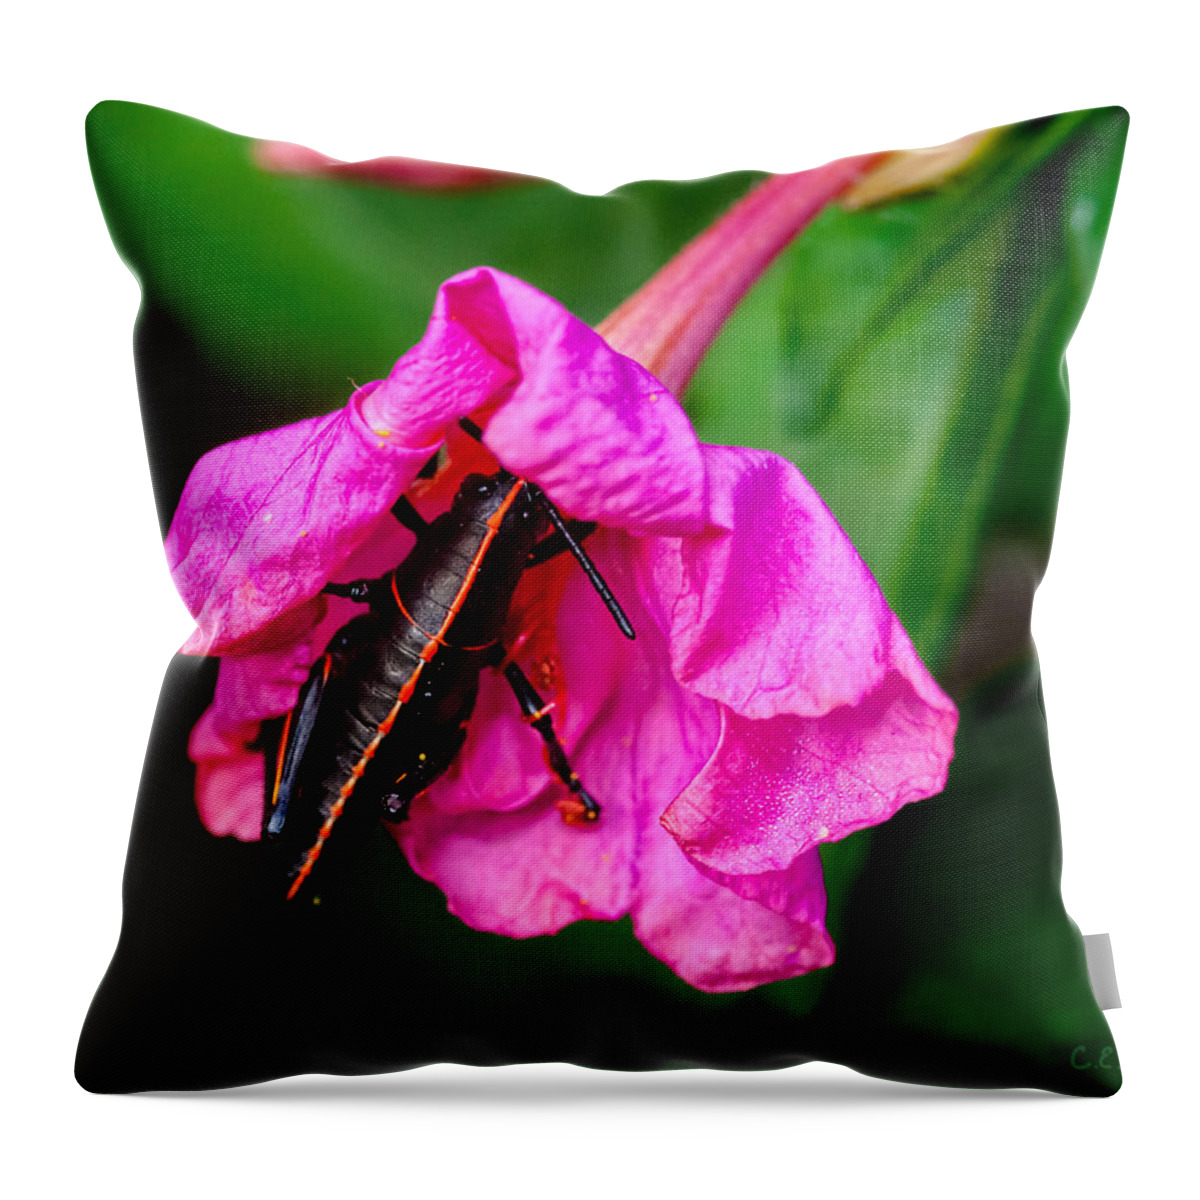 Grasshopper Throw Pillow featuring the photograph Pit Stop by Christopher Holmes